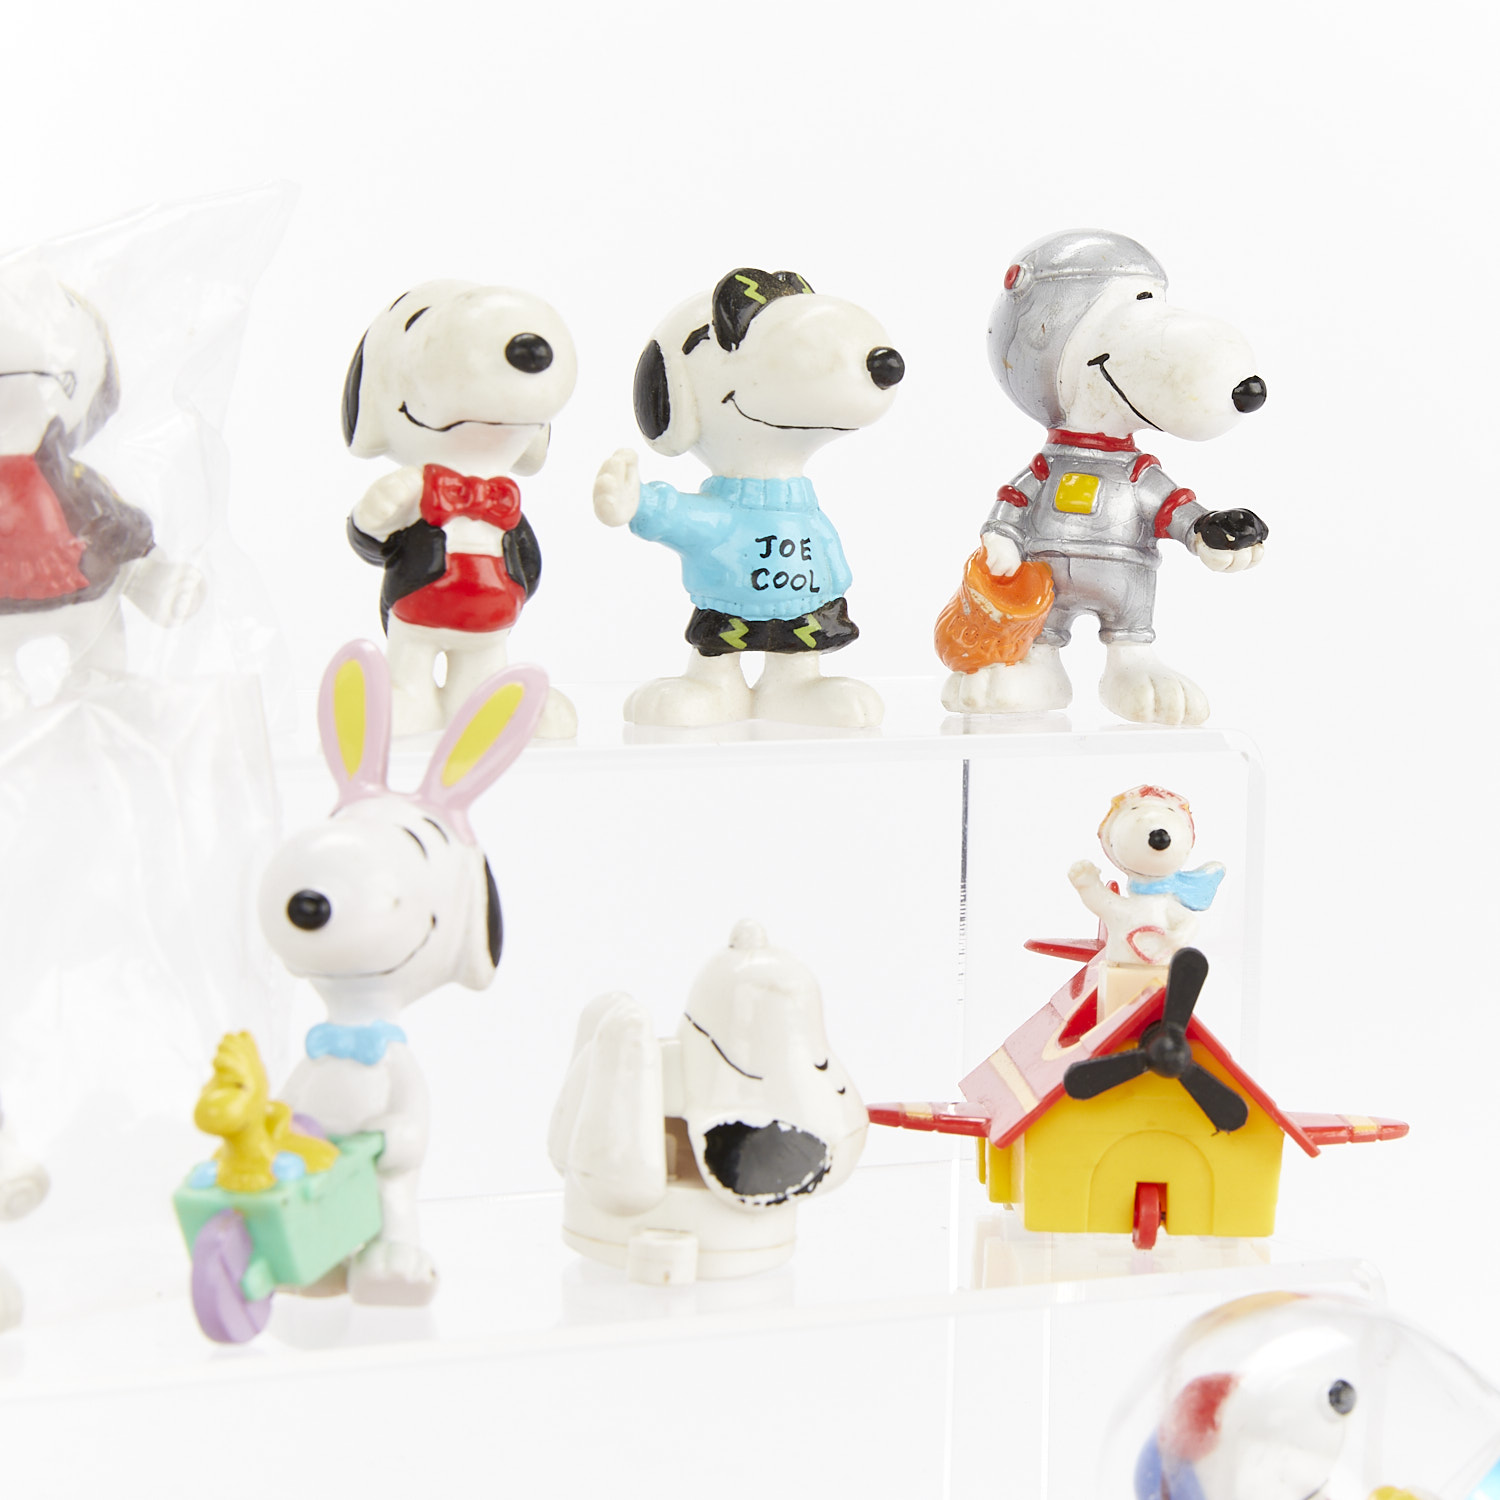 Group of 16 Snoopy Figurines and Bandages - Image 3 of 12